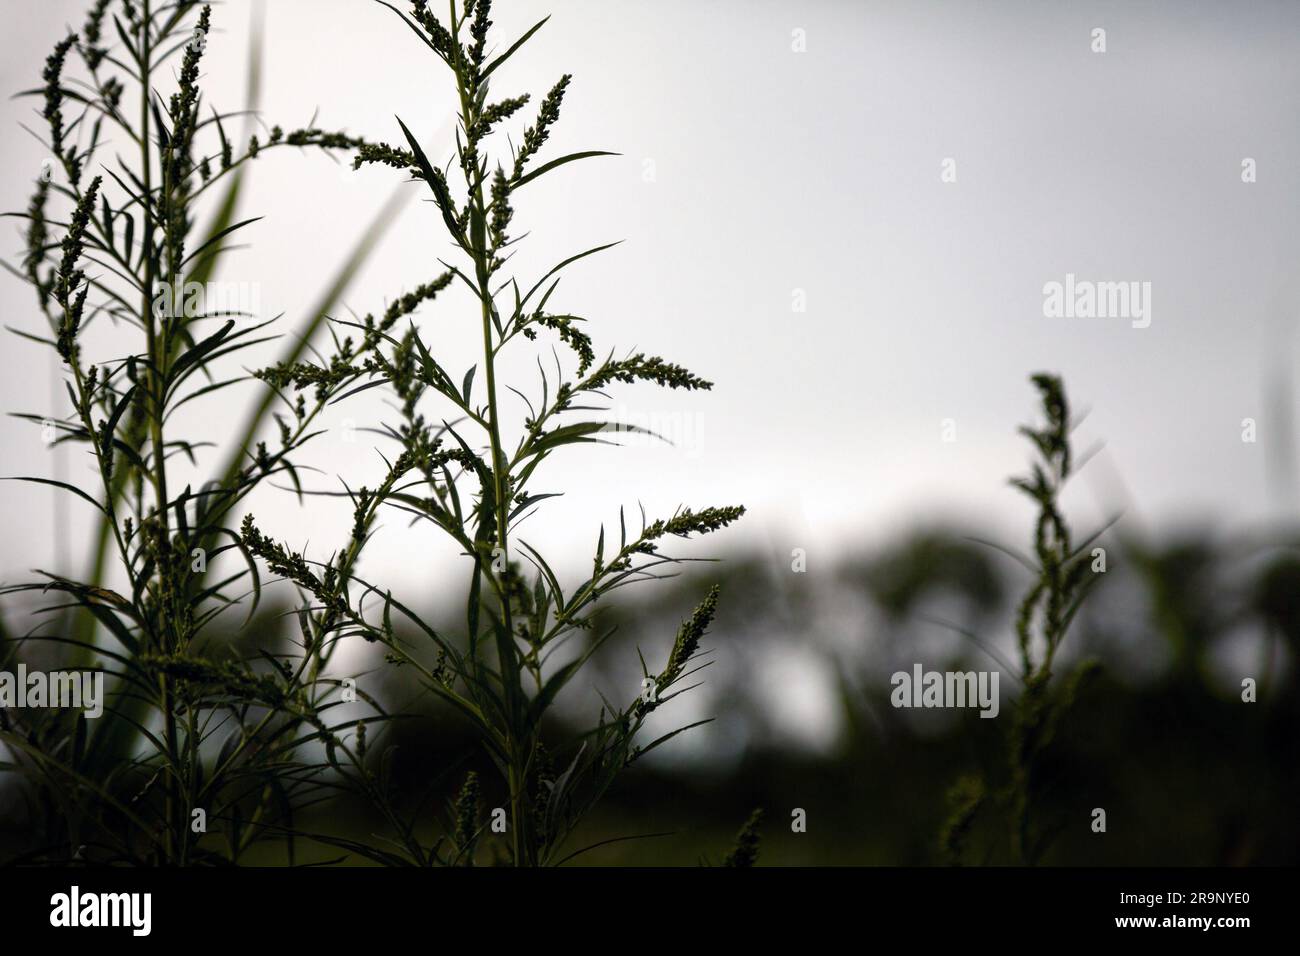 Dark silhouette of common wormwood plants against evening sky. Selective focus on 2 plants on a blurry background. Anxiety, sorrow, melancholy concept Stock Photo